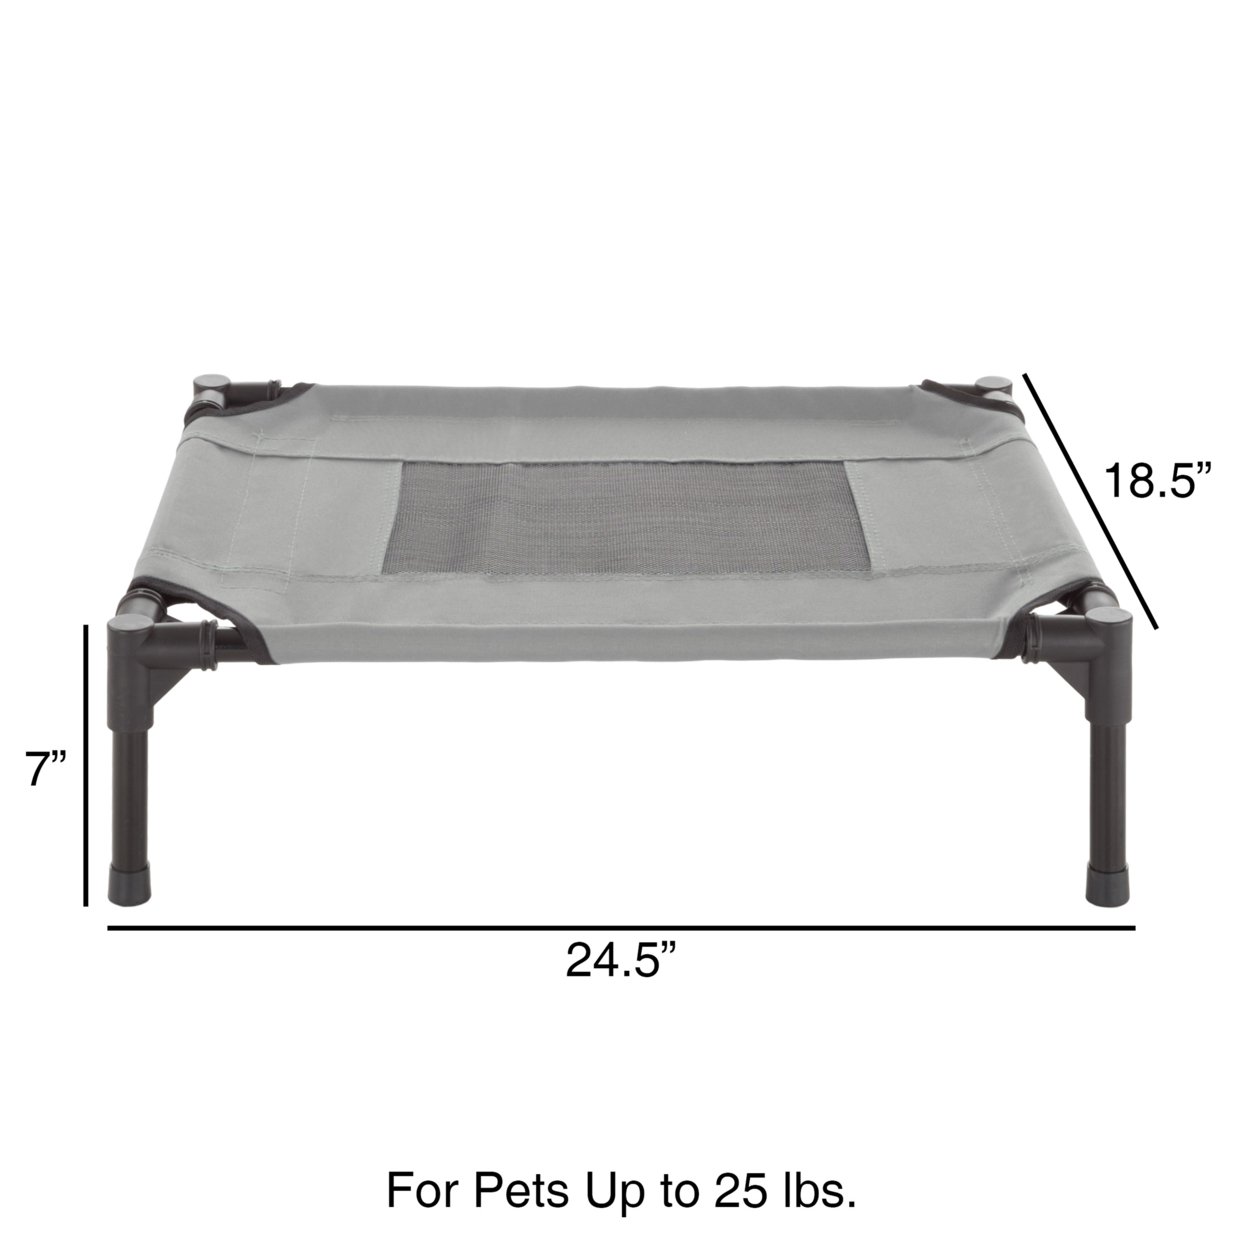 Elevated Pet Bed-Portable Raised Cot-Style Bed Non-Slip Feet, 24.5x 18.5x 7 For Dogs, Cats, And Small Pets Gray